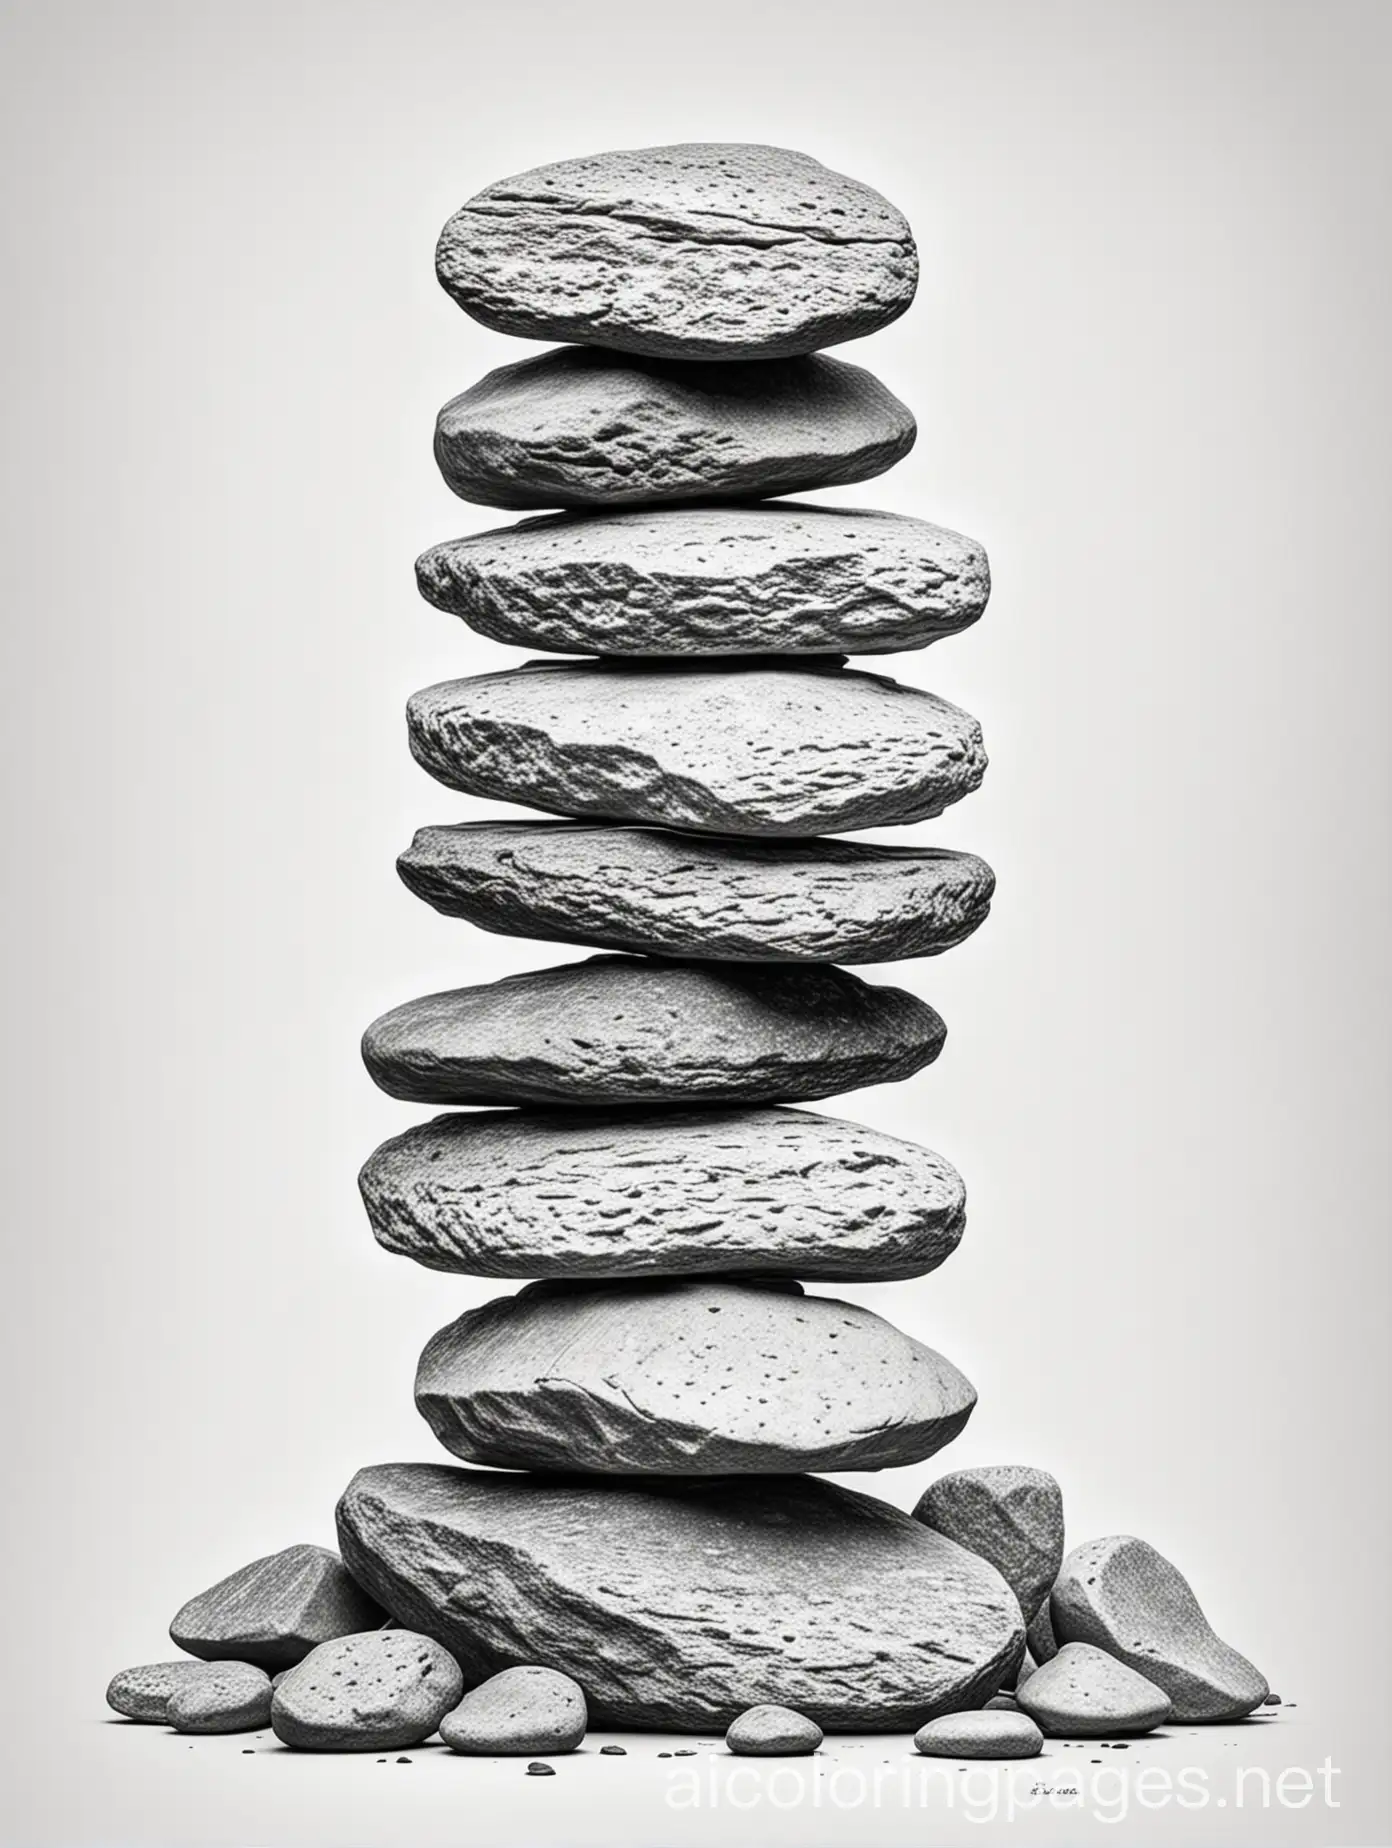 stacked stones trail marker, Coloring Page, black and white, line art, white background, Simplicity, Ample White Space. The background of the coloring page is plain white to make it easy for young children to color within the lines. The outlines of all the subjects are easy to distinguish, making it simple for kids to color without too much difficulty